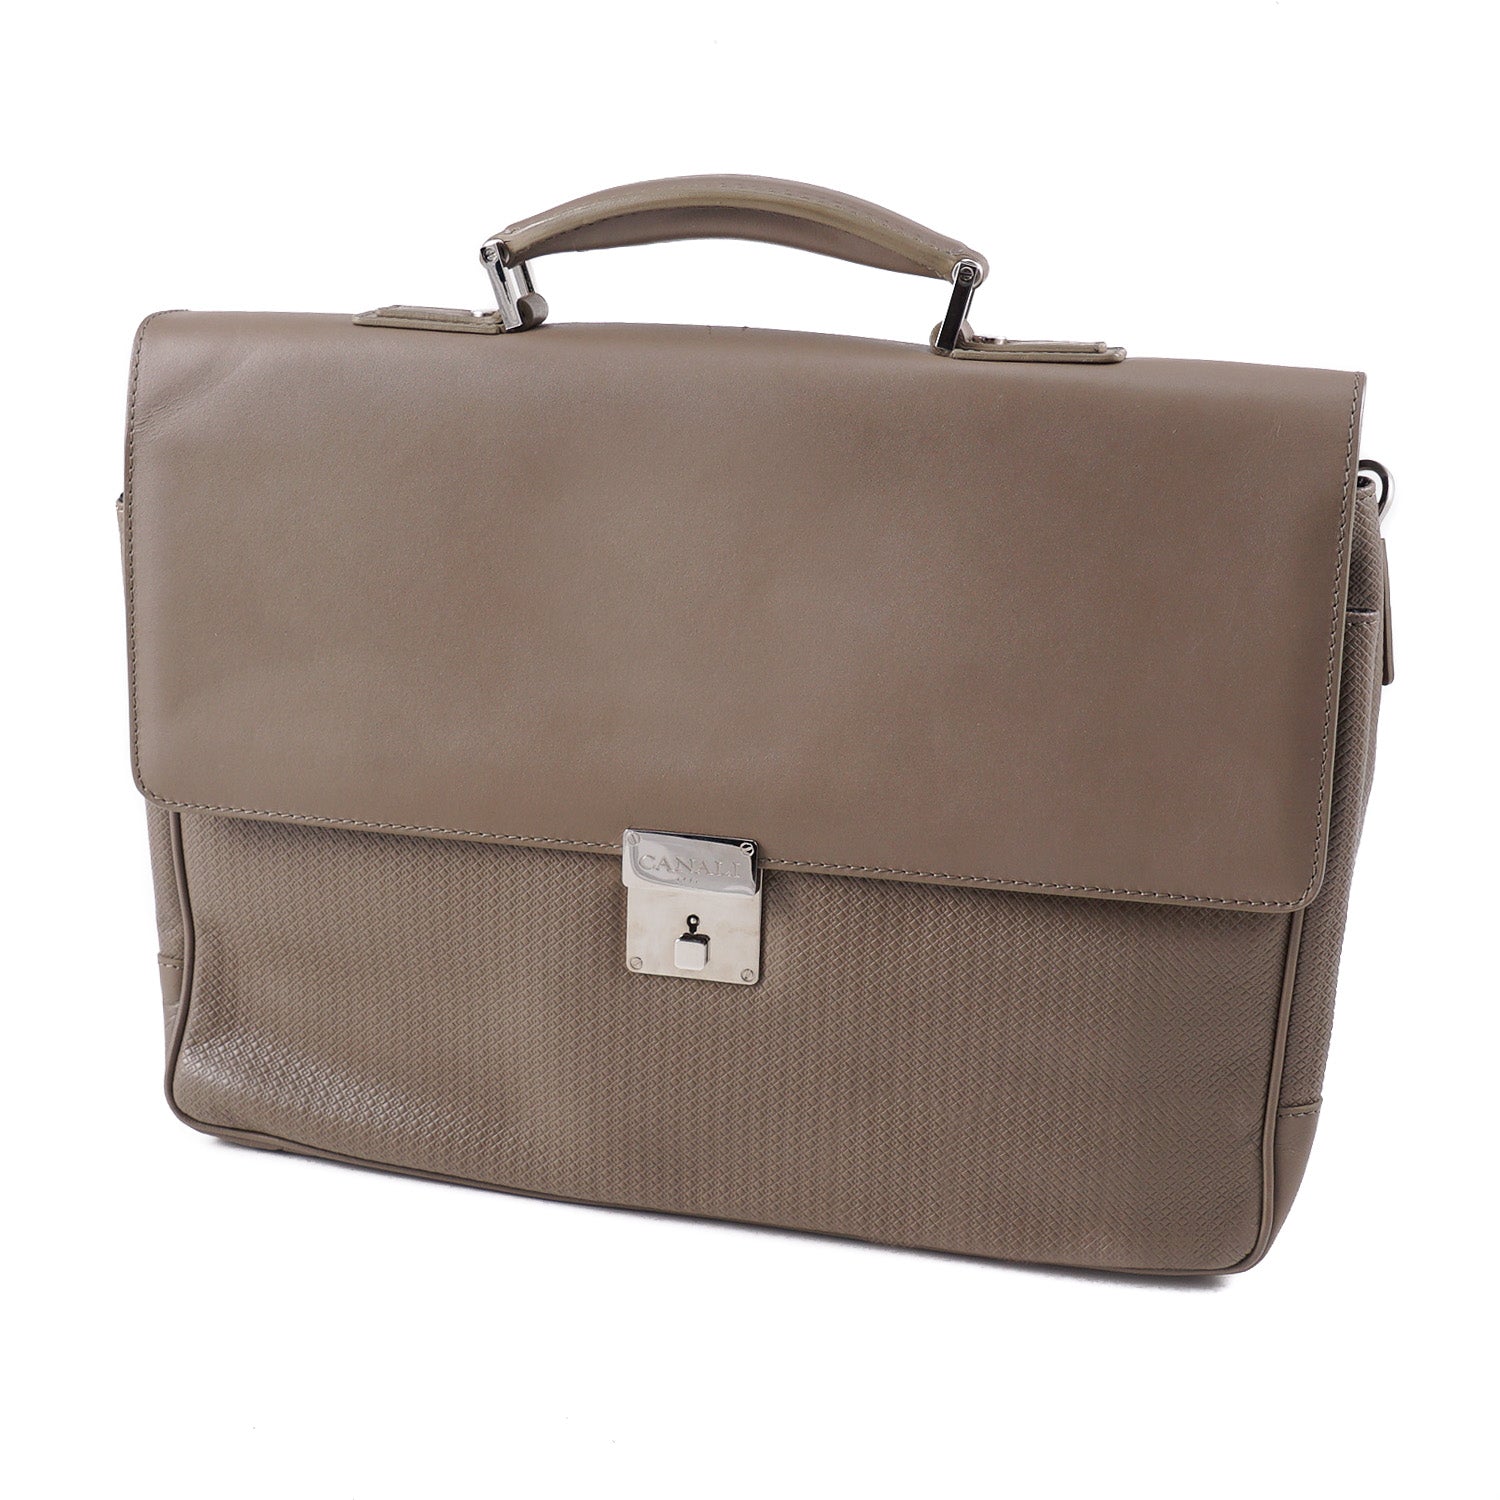 Canali Printed Leather Briefcase – Top Shelf Apparel